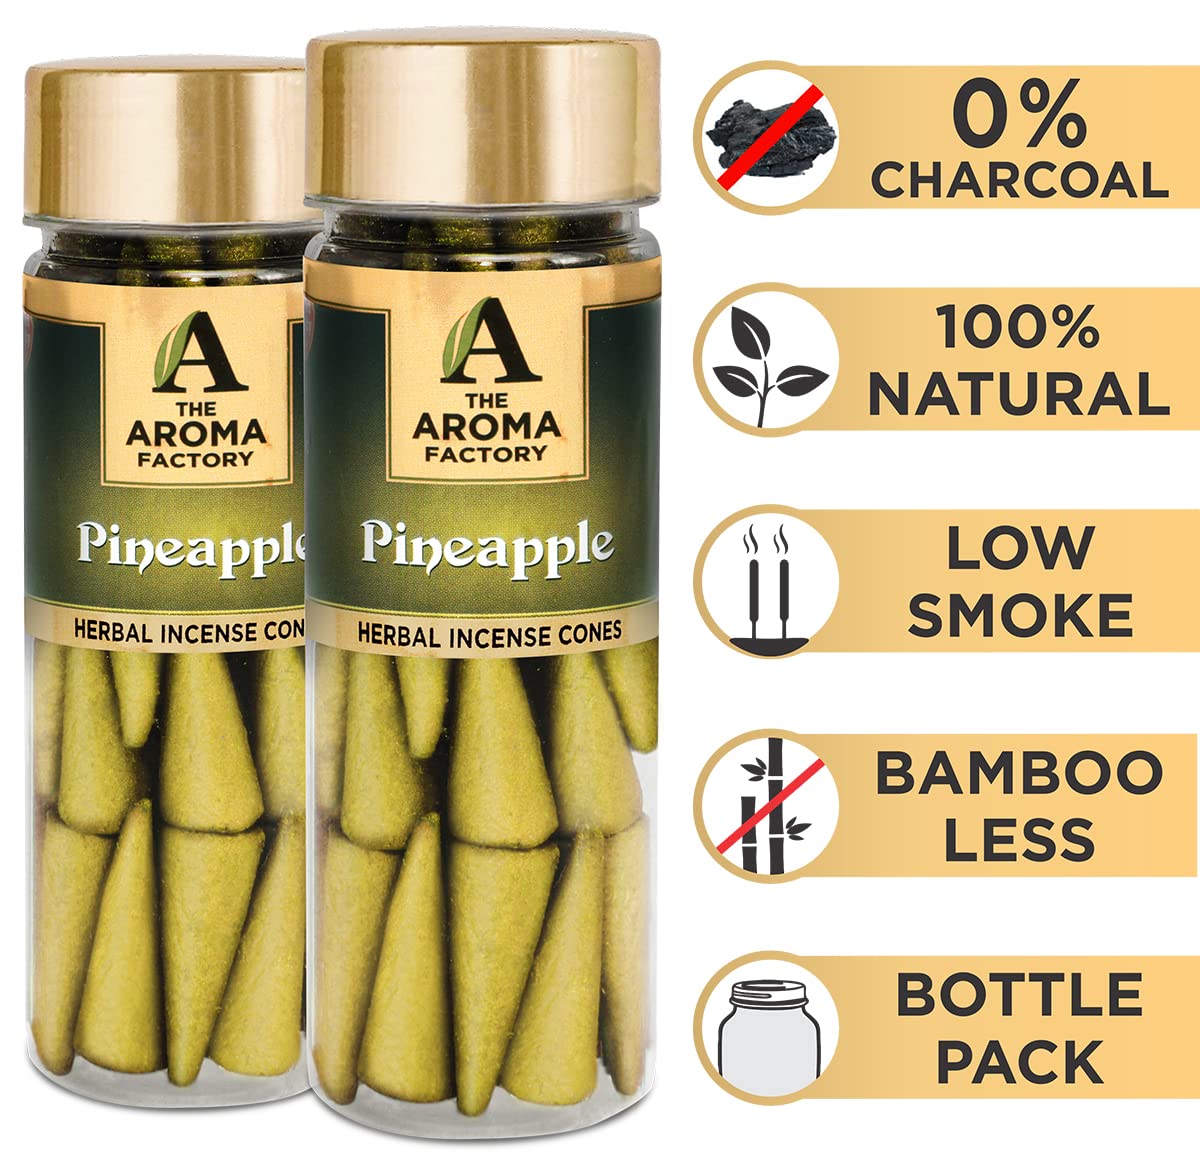 The Aroma Factory Incense Dhoop Cone for Pooja, Pineapple (100% Herbal & 0% Charcoal) 2 Bottles x 30 Cones